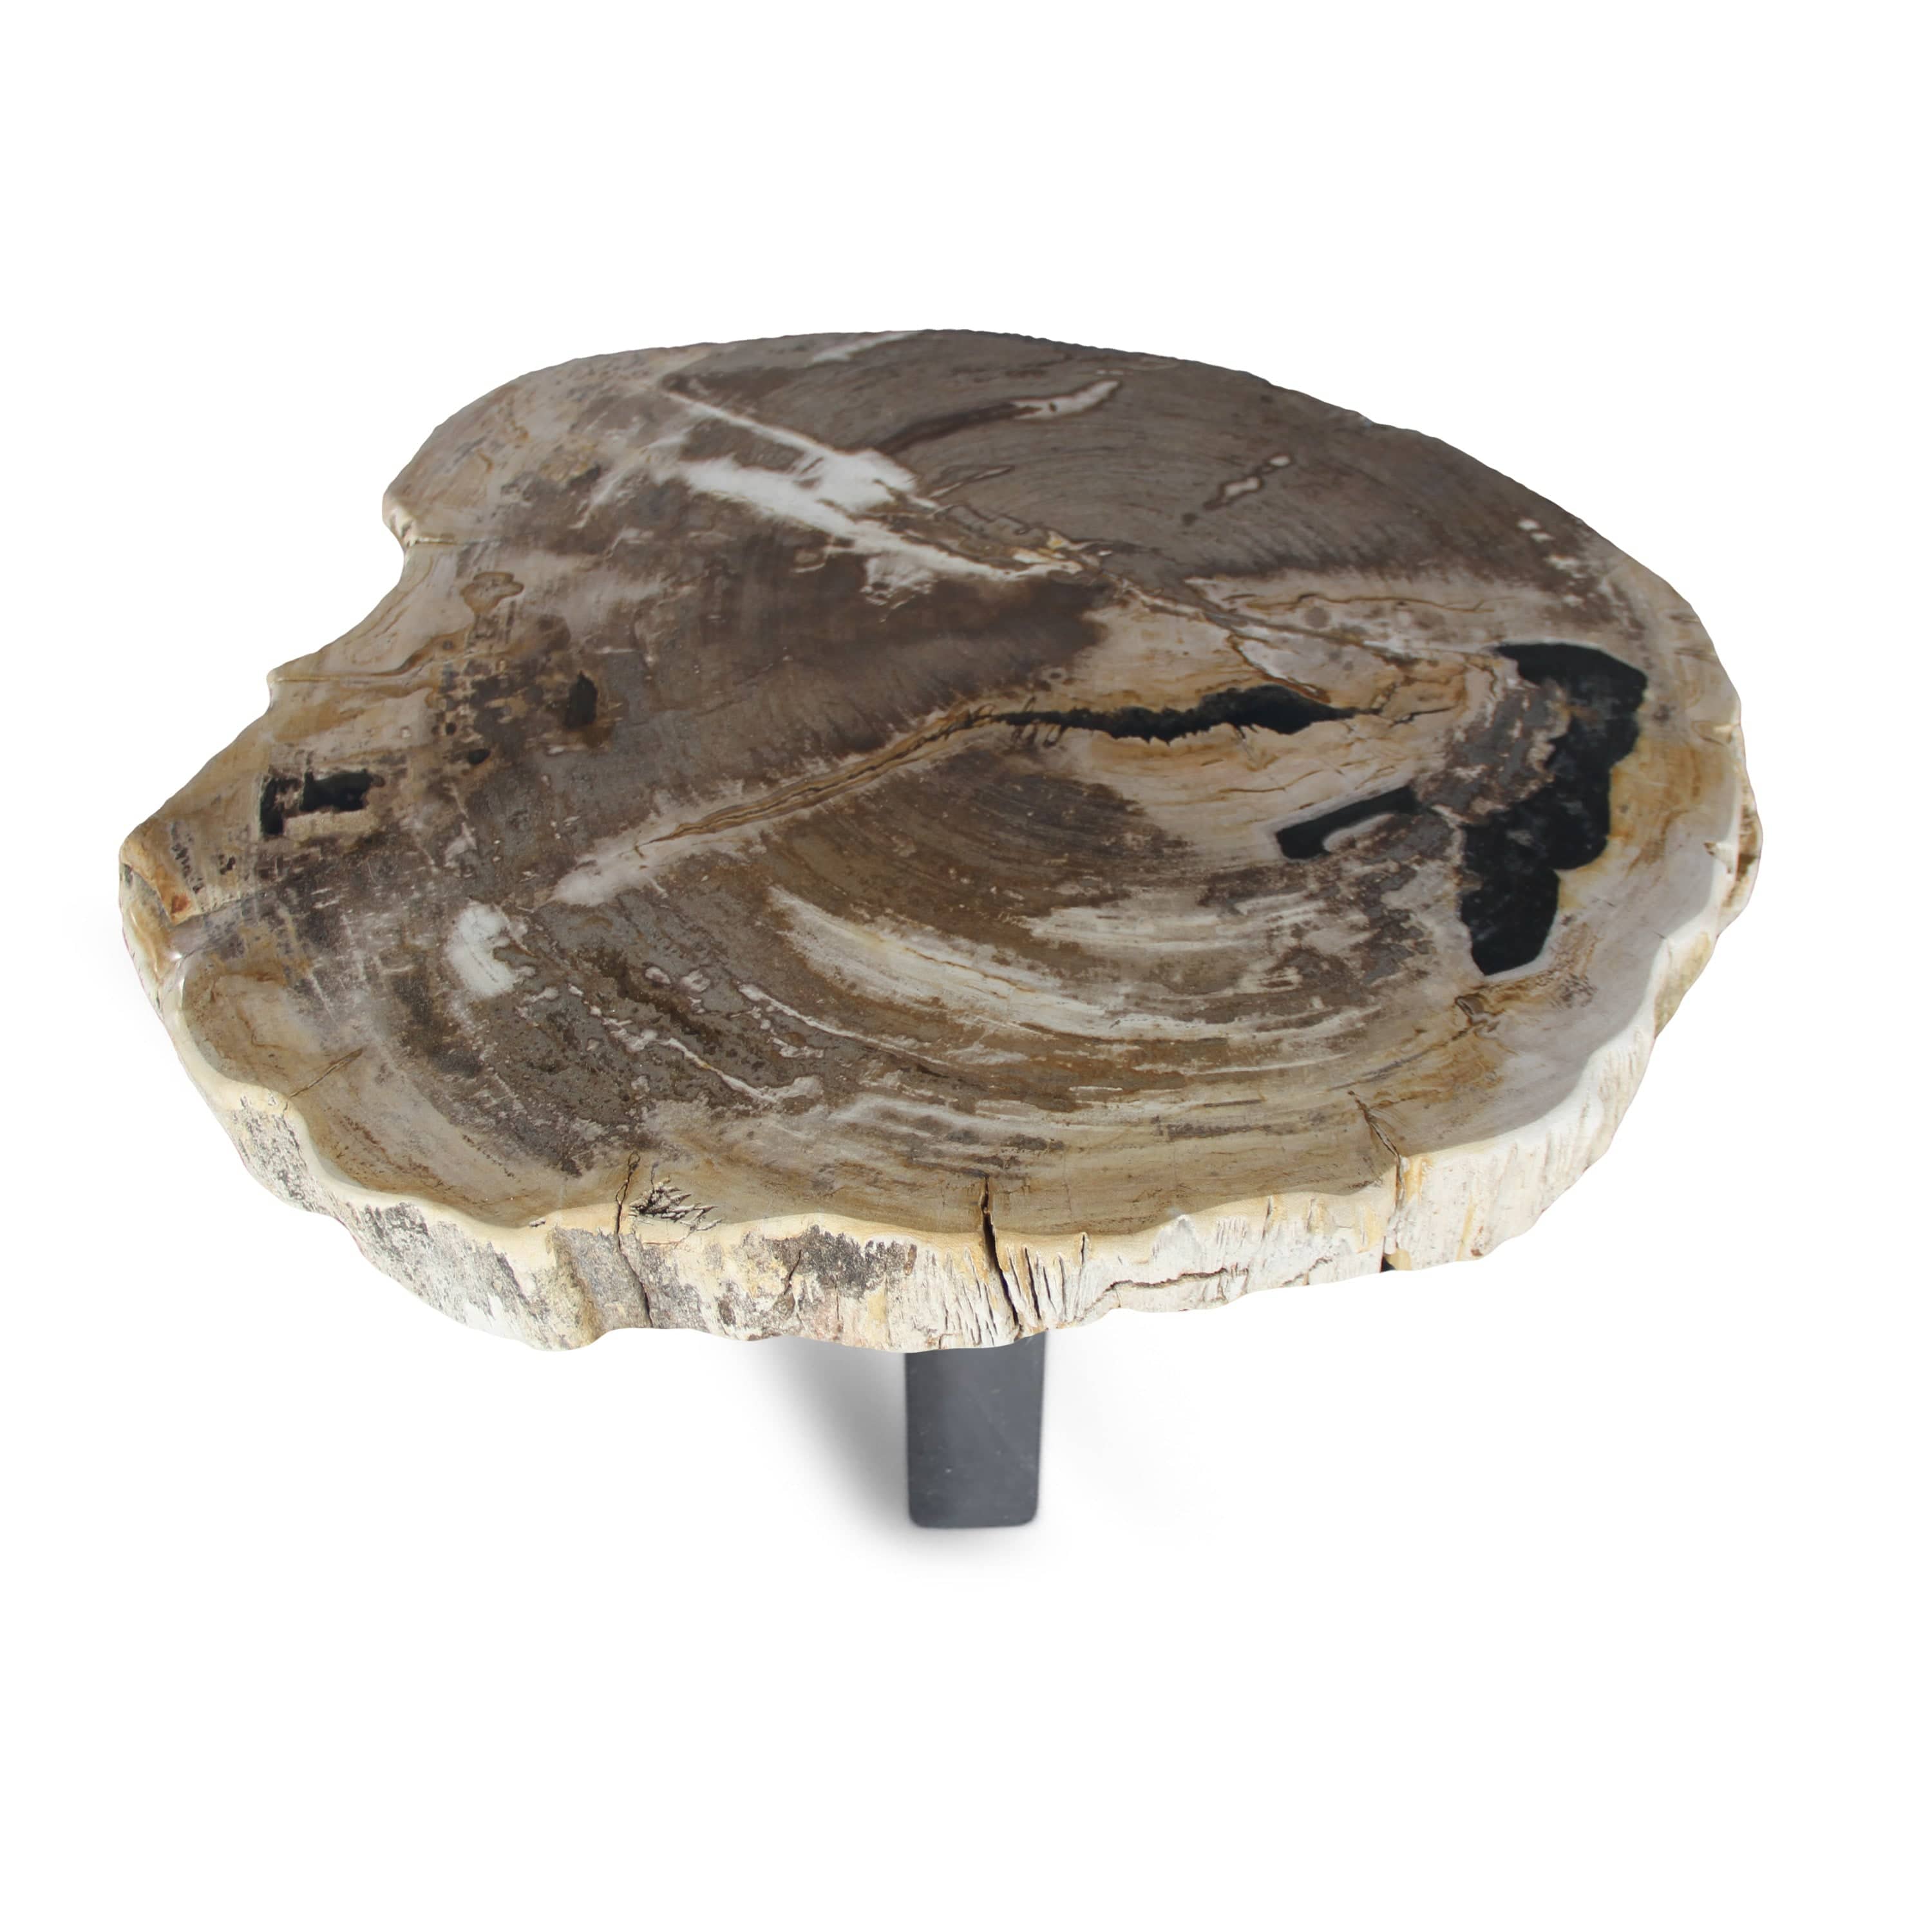 Kalifano Petrified Wood Petrified Wood Round Slab Coffee Table from Indonesia - 31" / 172 lbs PWT6400.003